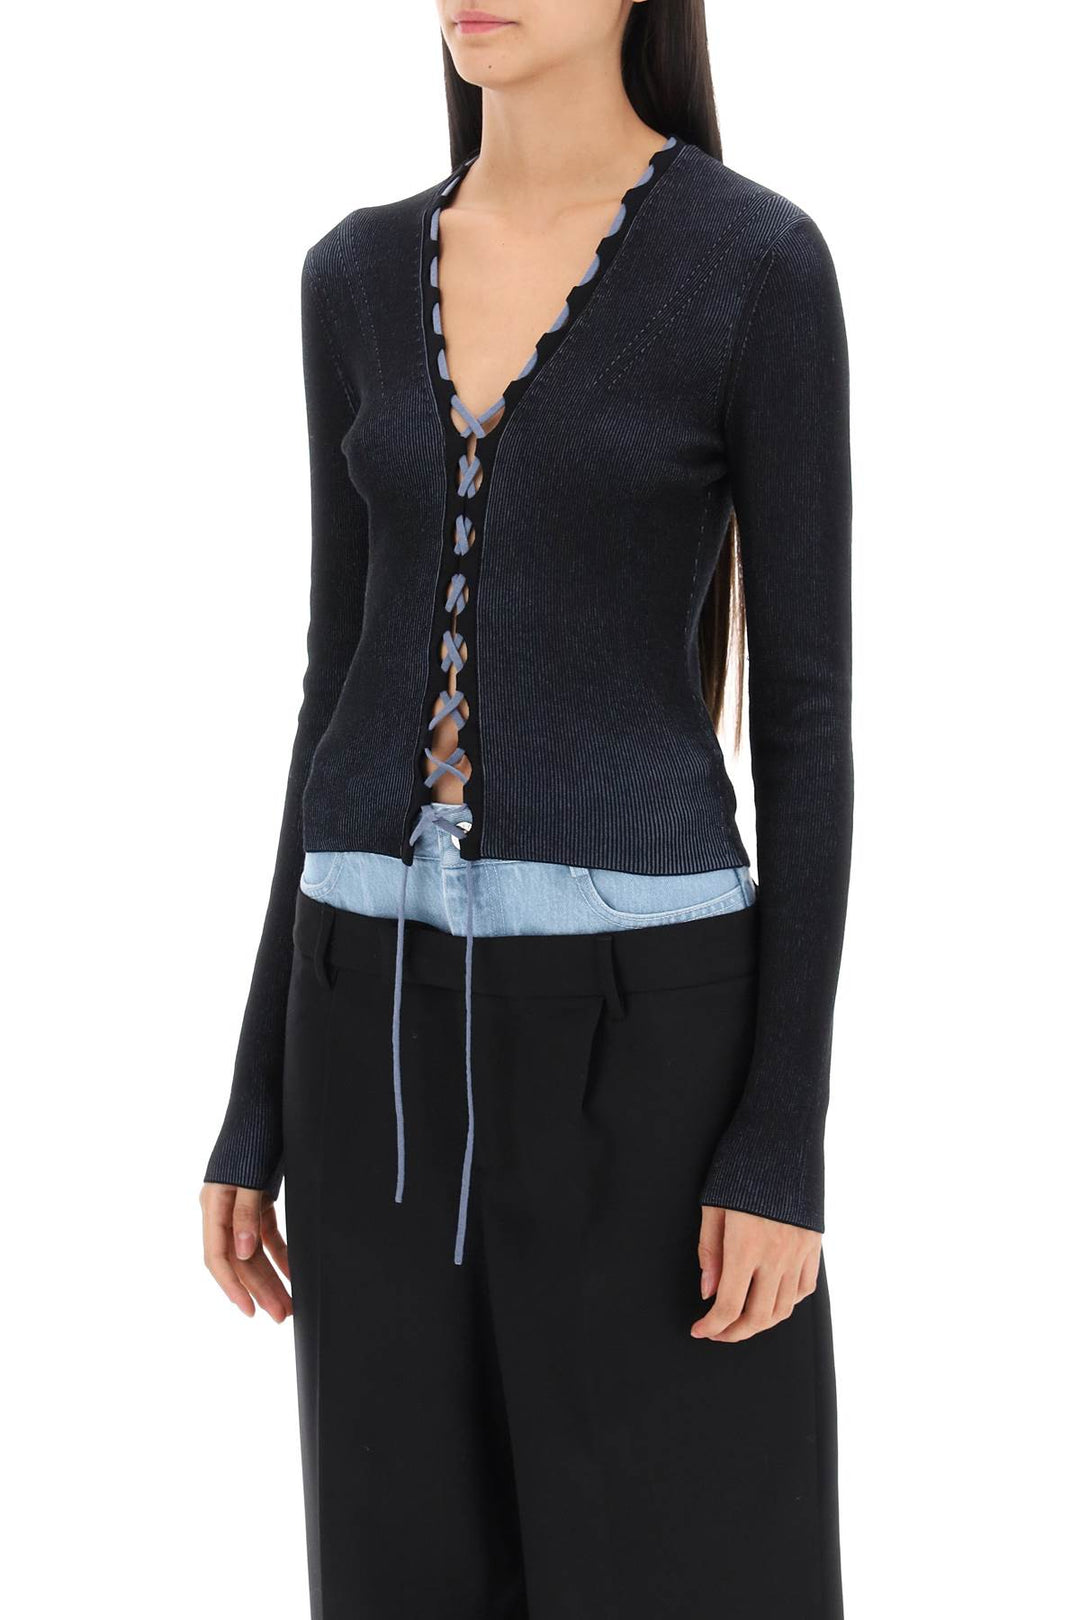 Dion lee two-tone lace-up cardigan-3